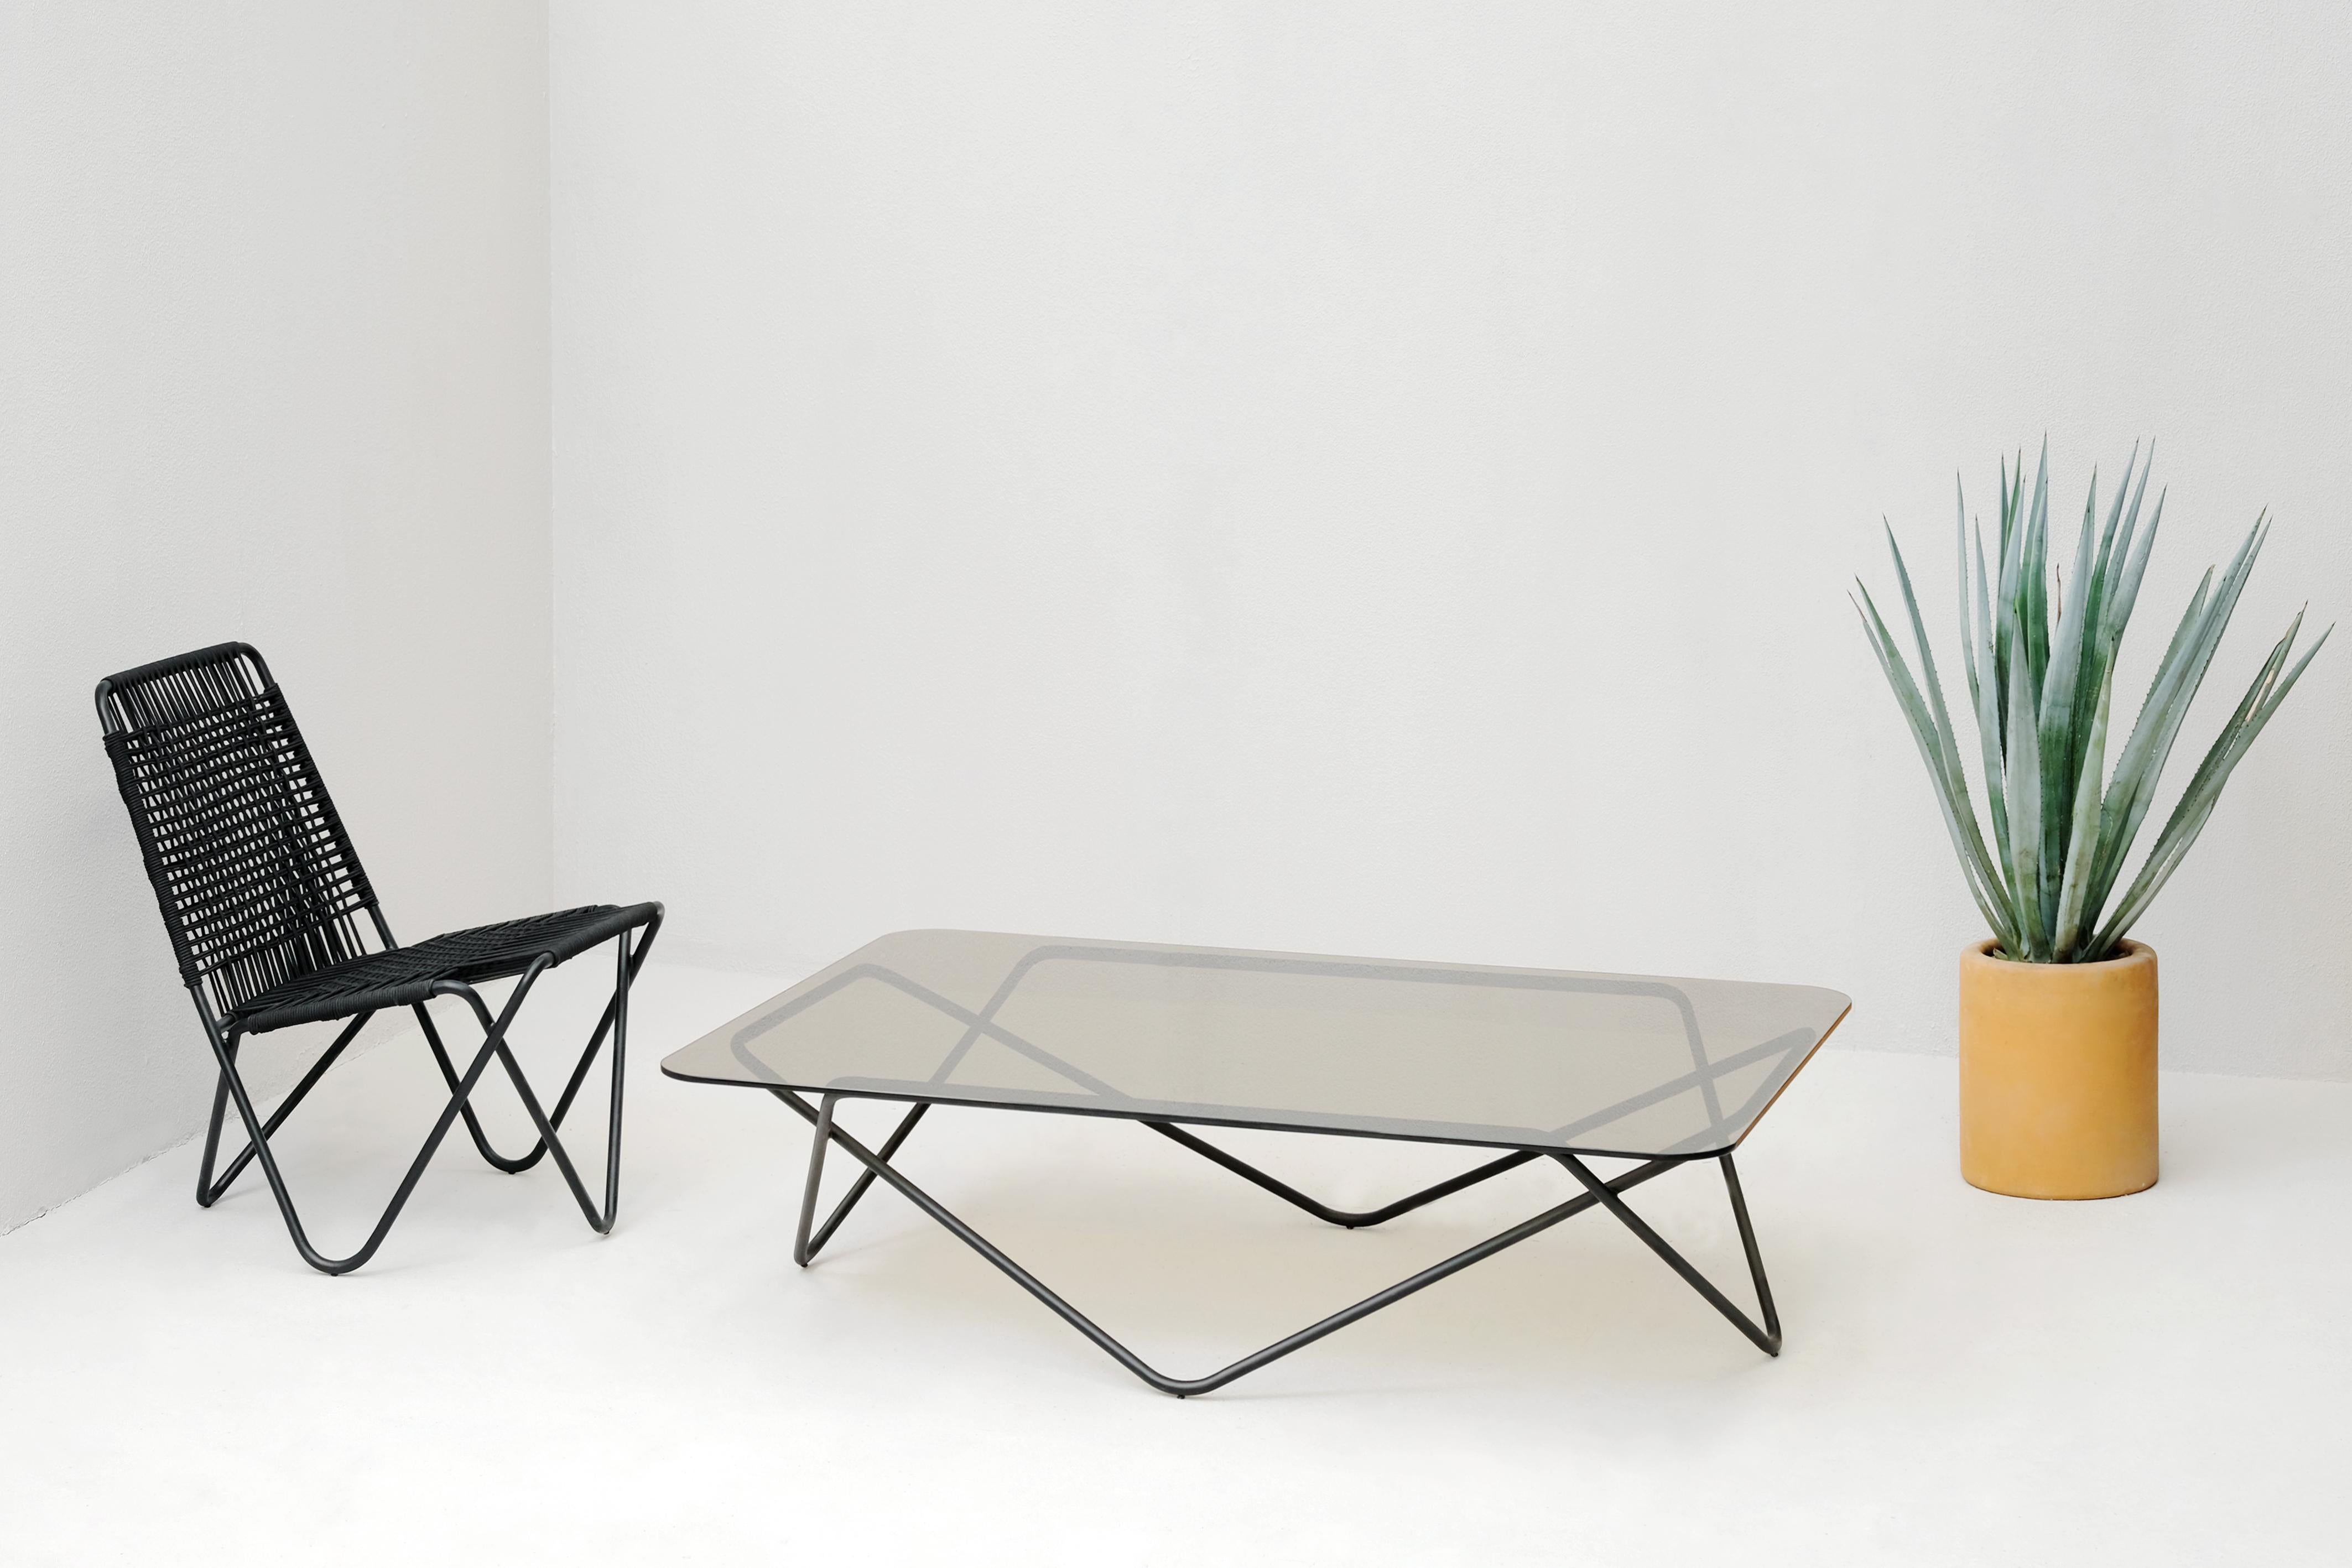 Penca is a line of outdoor furniture with a strong Mexican identity, designed for residential spaces as well as for common areas of restaurants or boutique hotels.
The concept of the Penca family, designed by Francisco Torres and Rosa Hanhausen